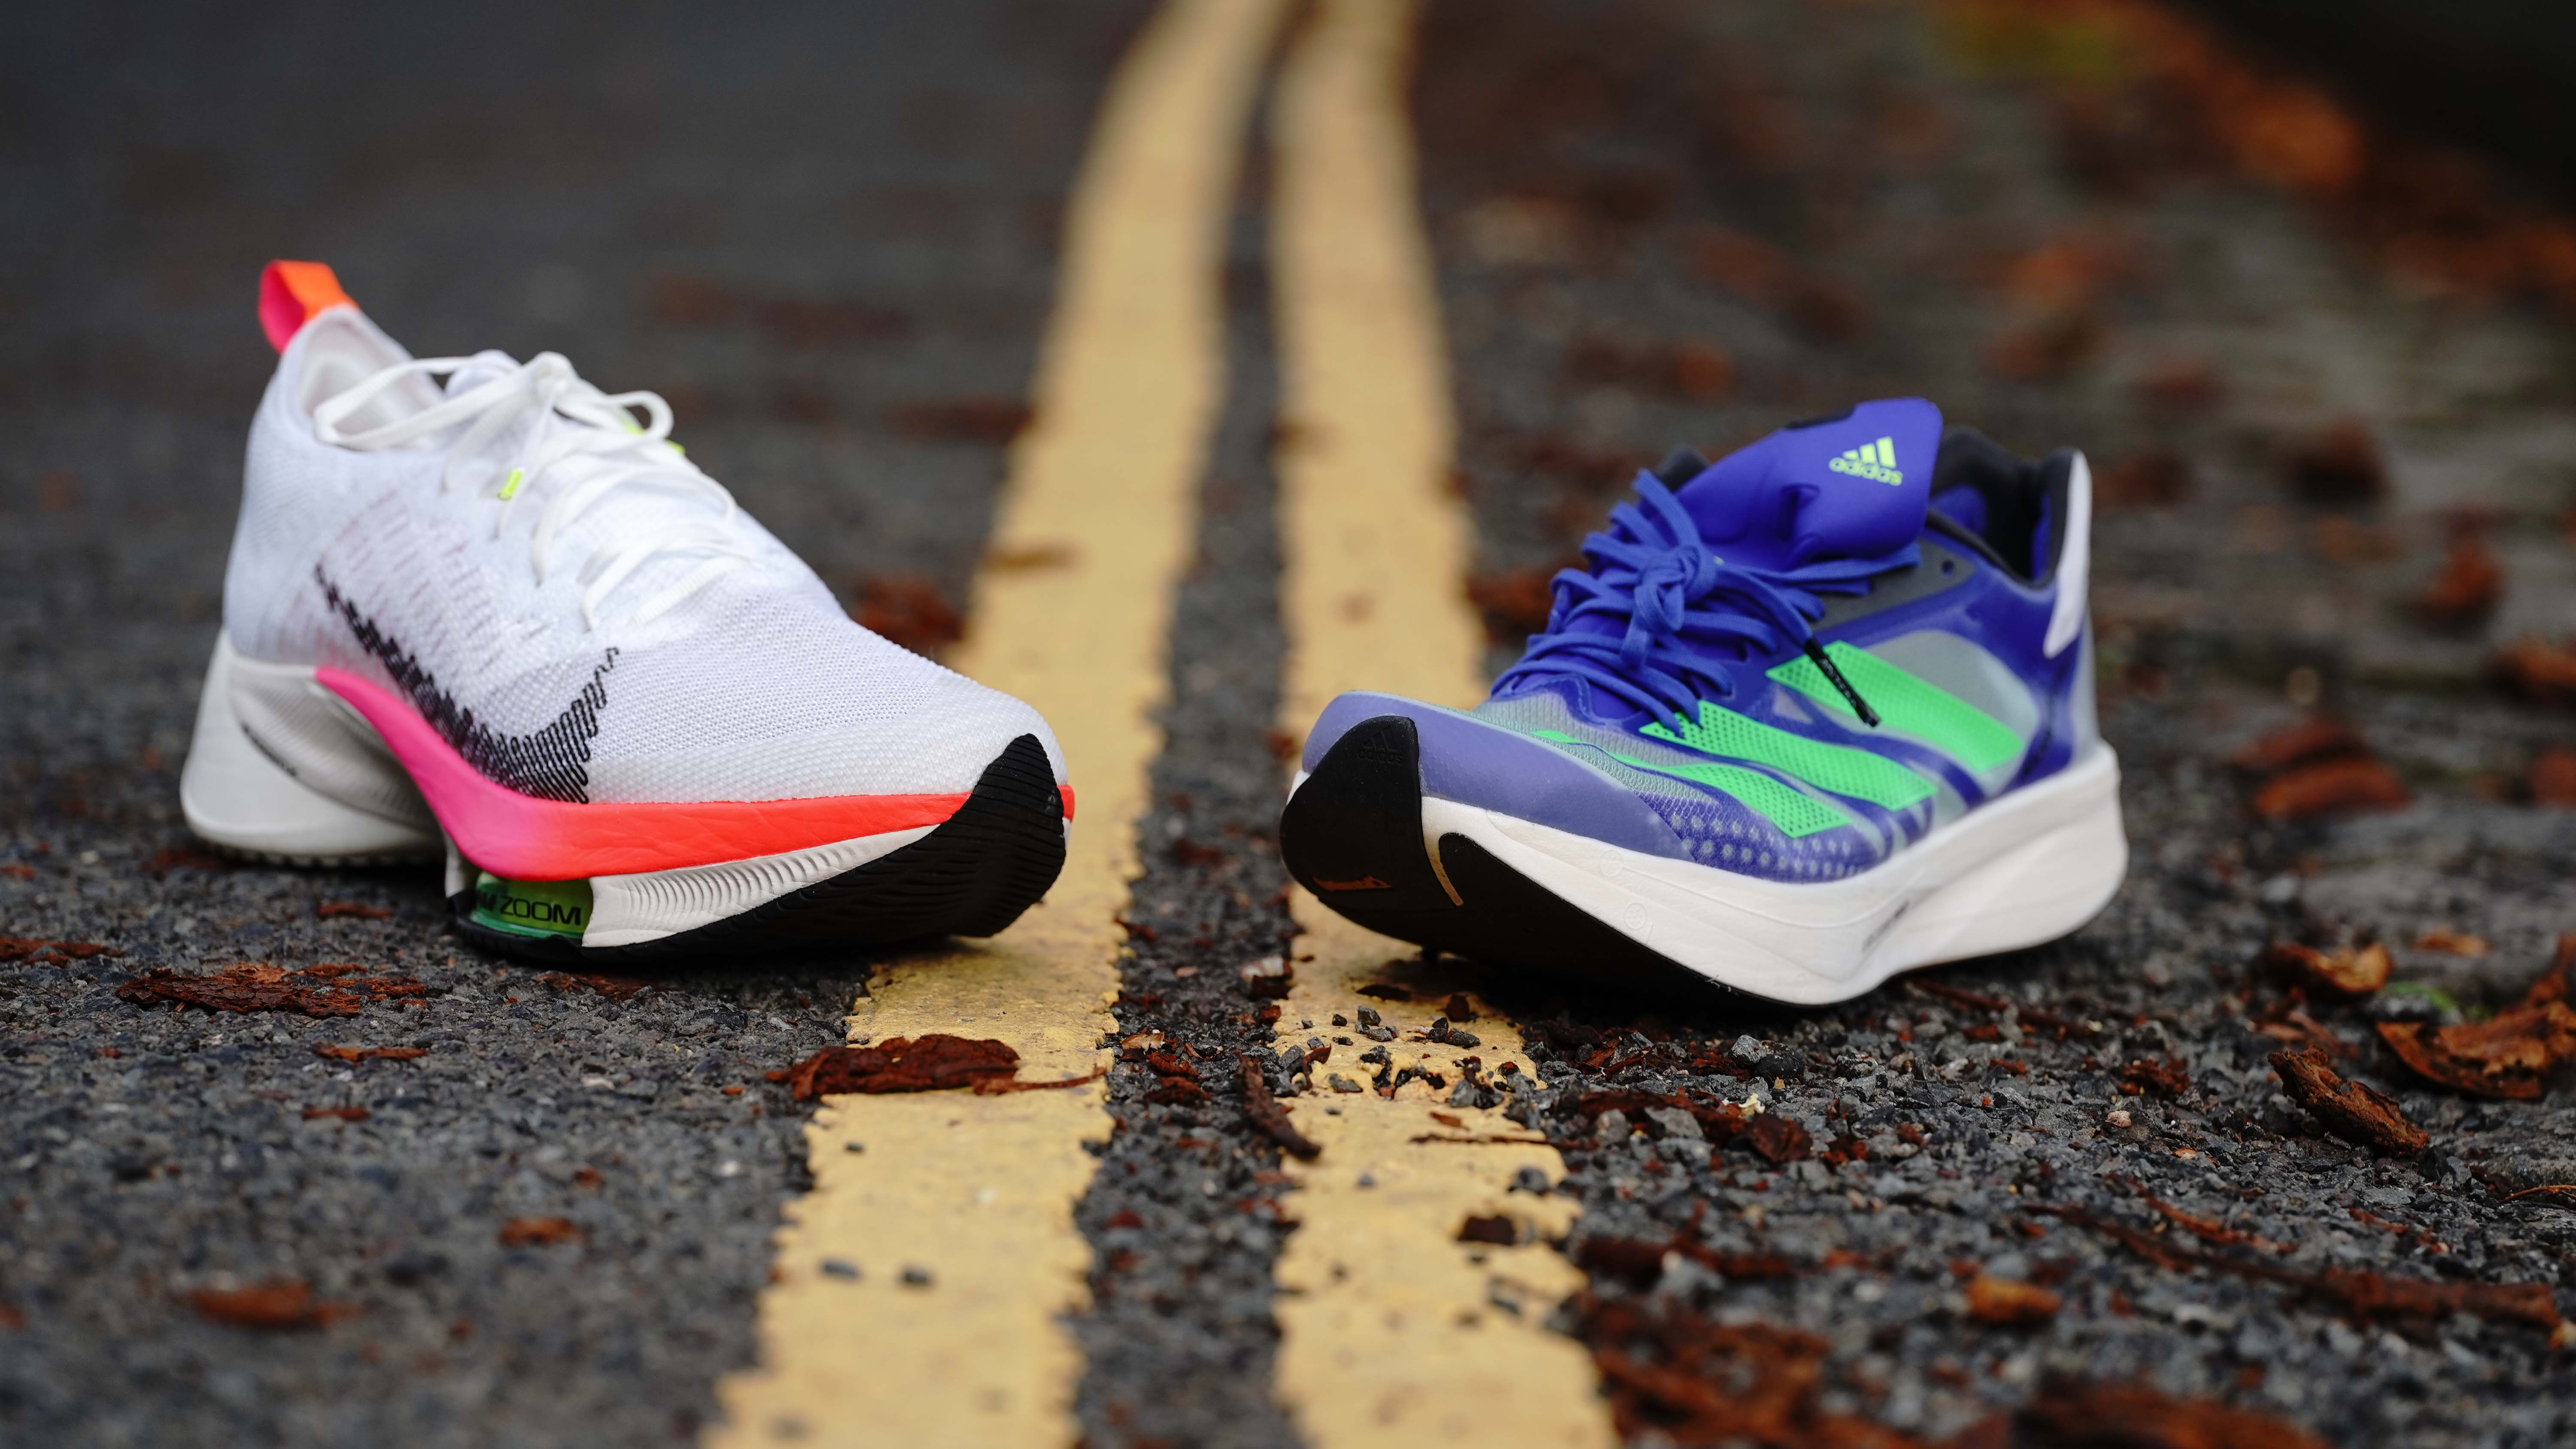 via mental Talk Nike Air Zoom Tempo NEXT% vs Adidas Adizero Adios Pro 2.0: which running  shoe is better for training and racing? | T3